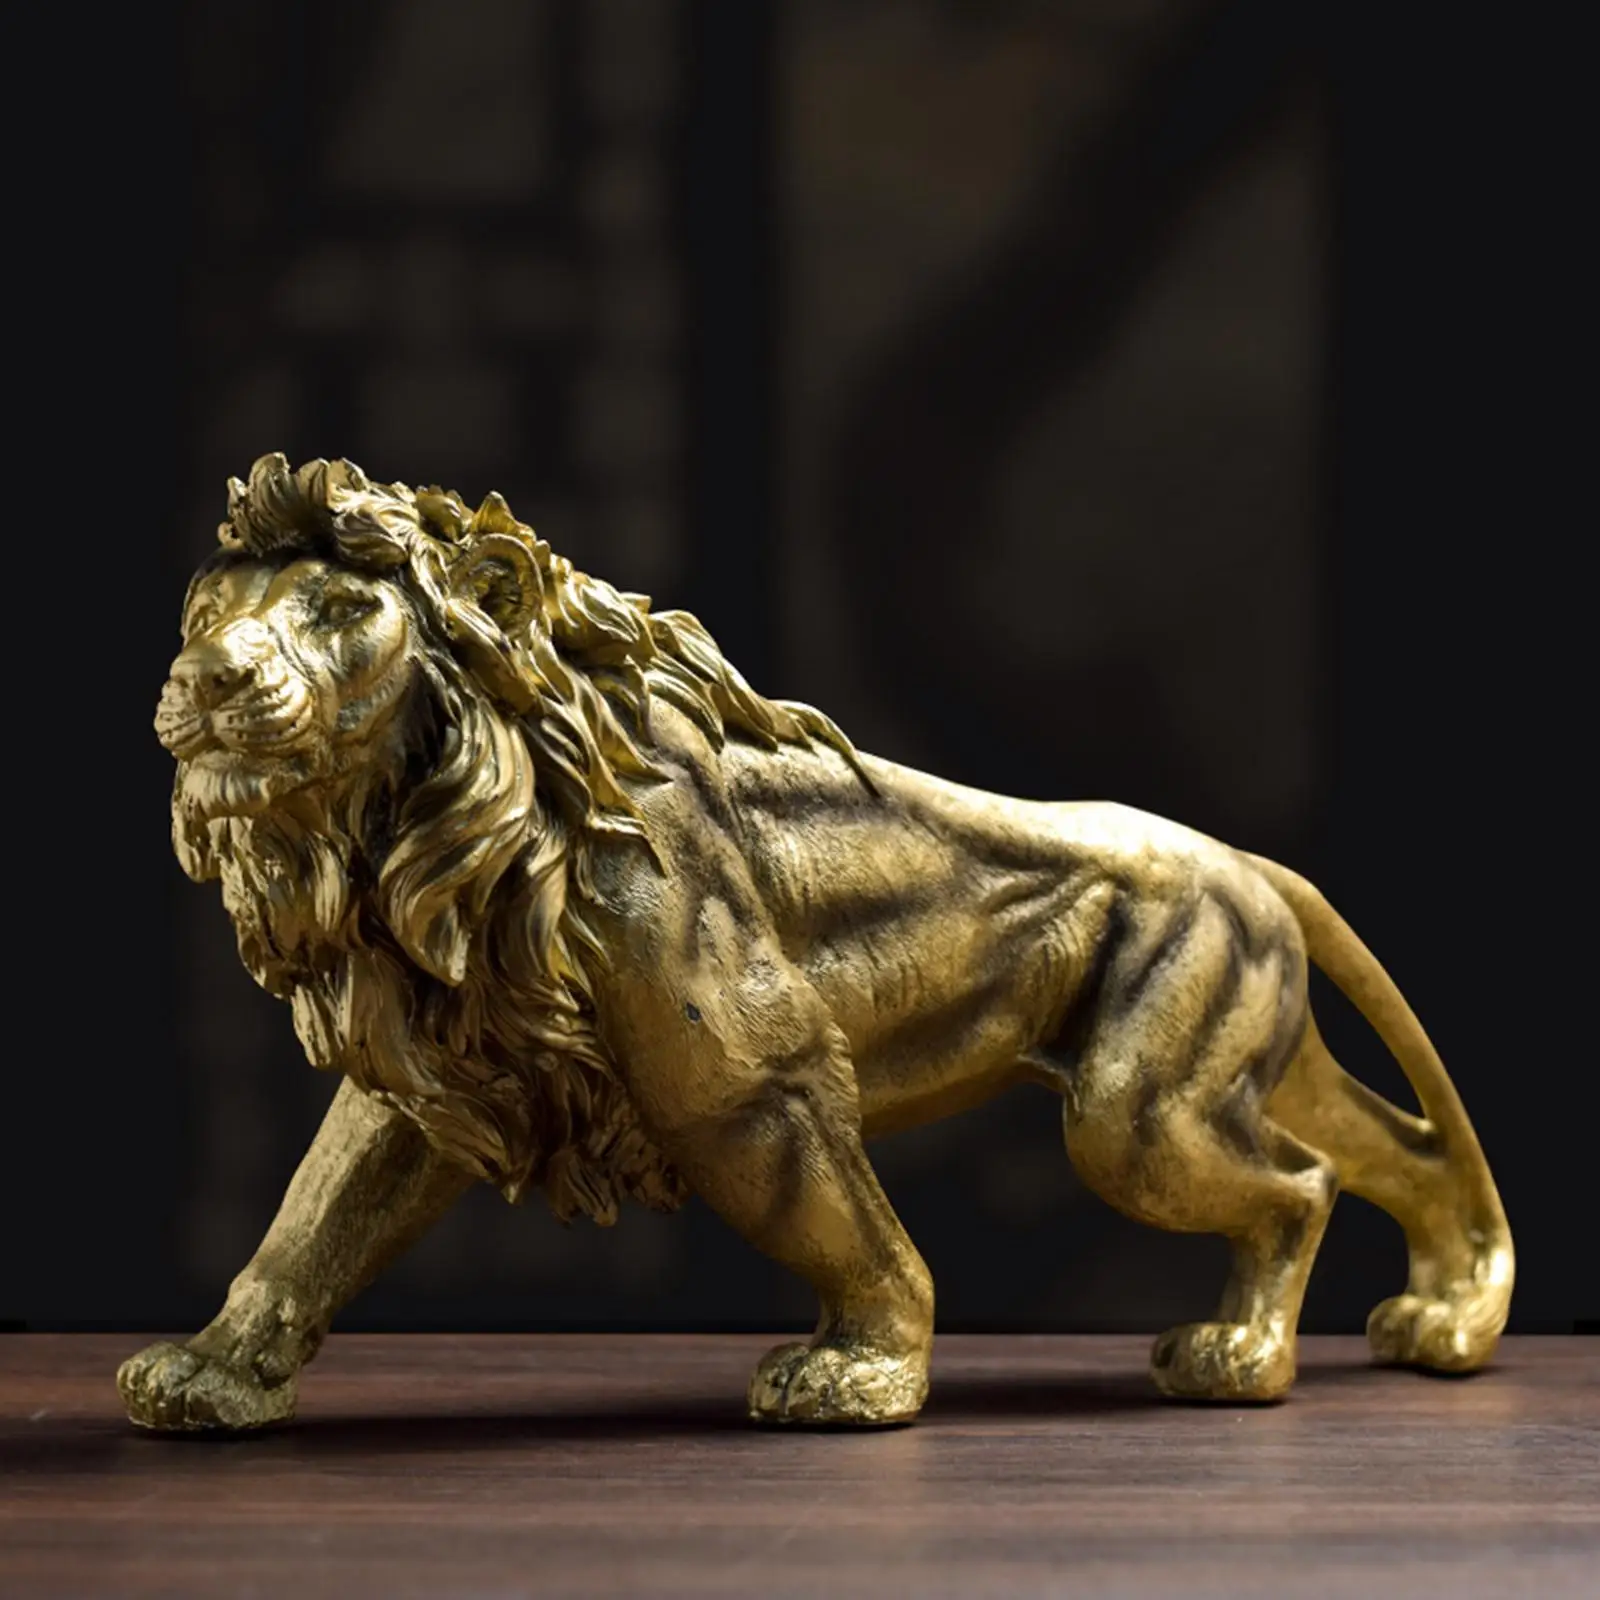 Large Lion Statue Animal Sculpture Art Crafts Resin for Home Porch Office Christmas Decoration